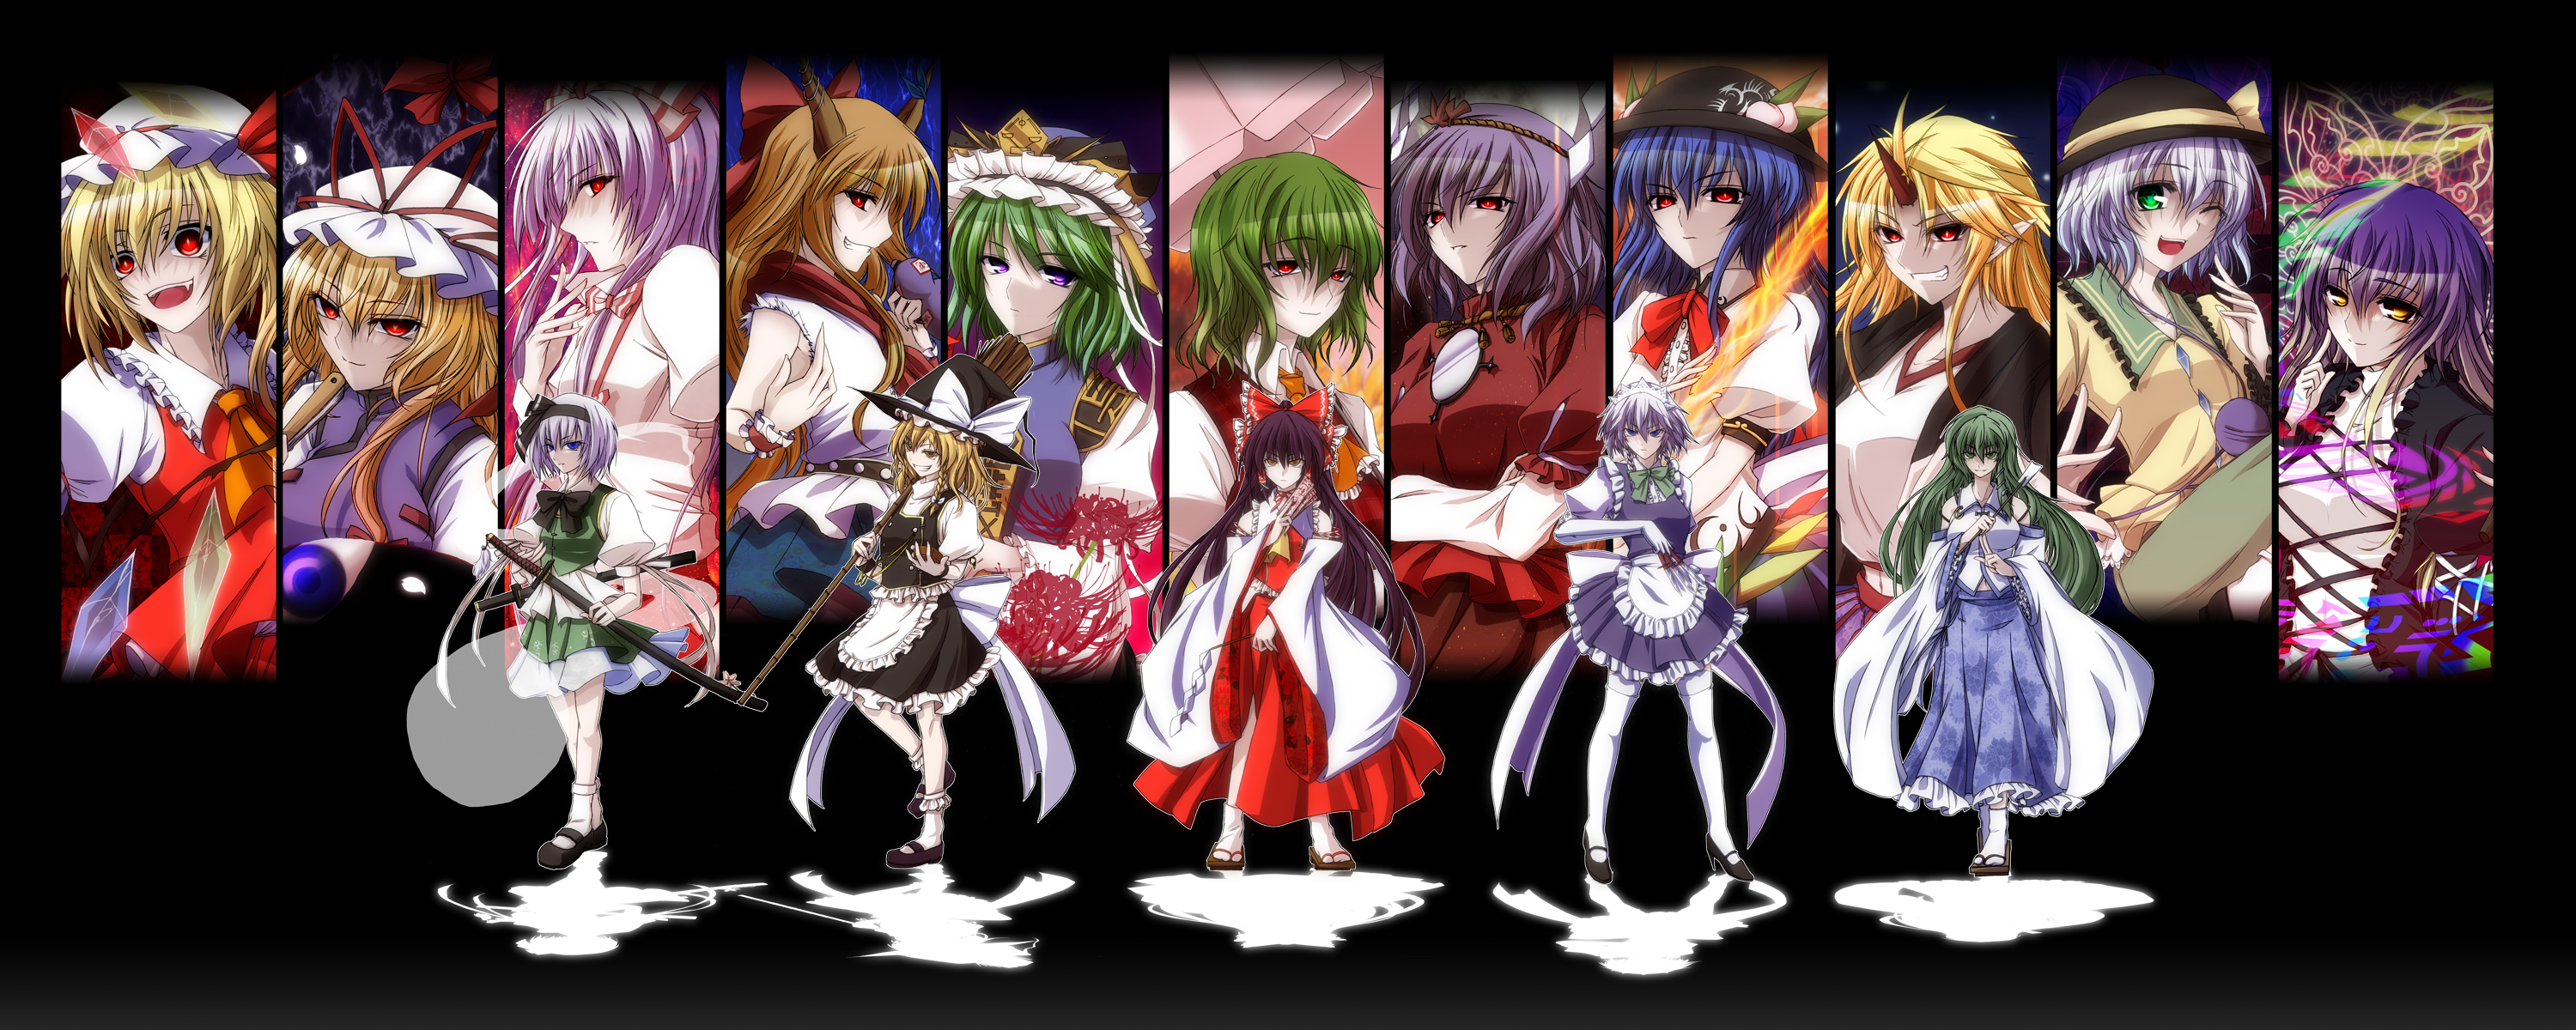 Nice Images Collection: Touhou Desktop Wallpapers